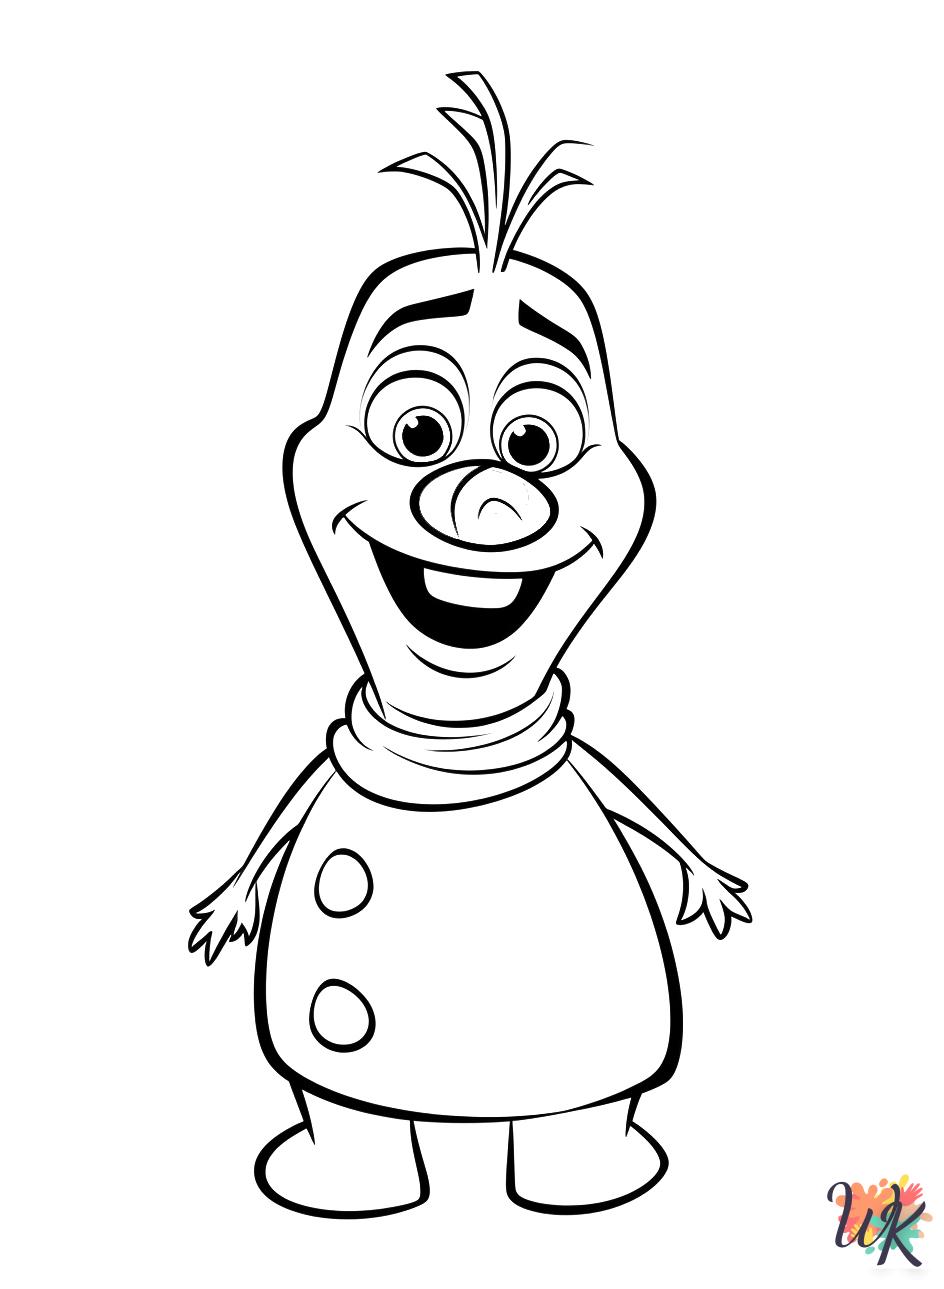 Olaf cards coloring pages